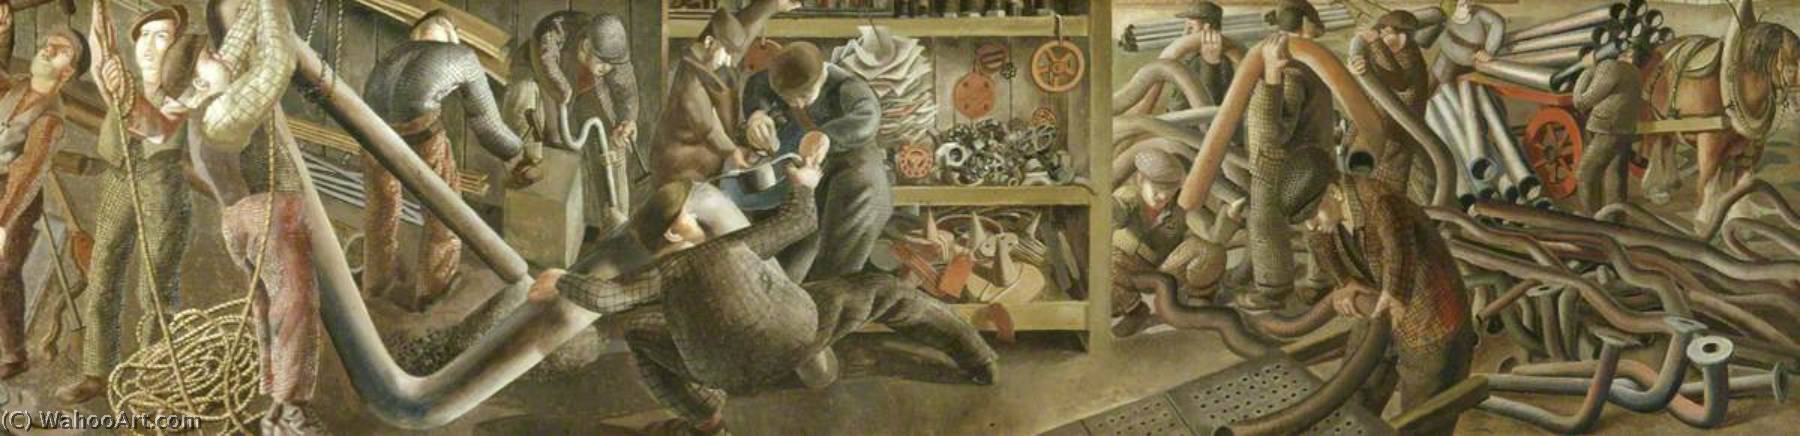 WikiOO.org - Encyclopedia of Fine Arts - Lukisan, Artwork Stanley Spencer - Shipbuilding on the Clyde Plumbers (right)